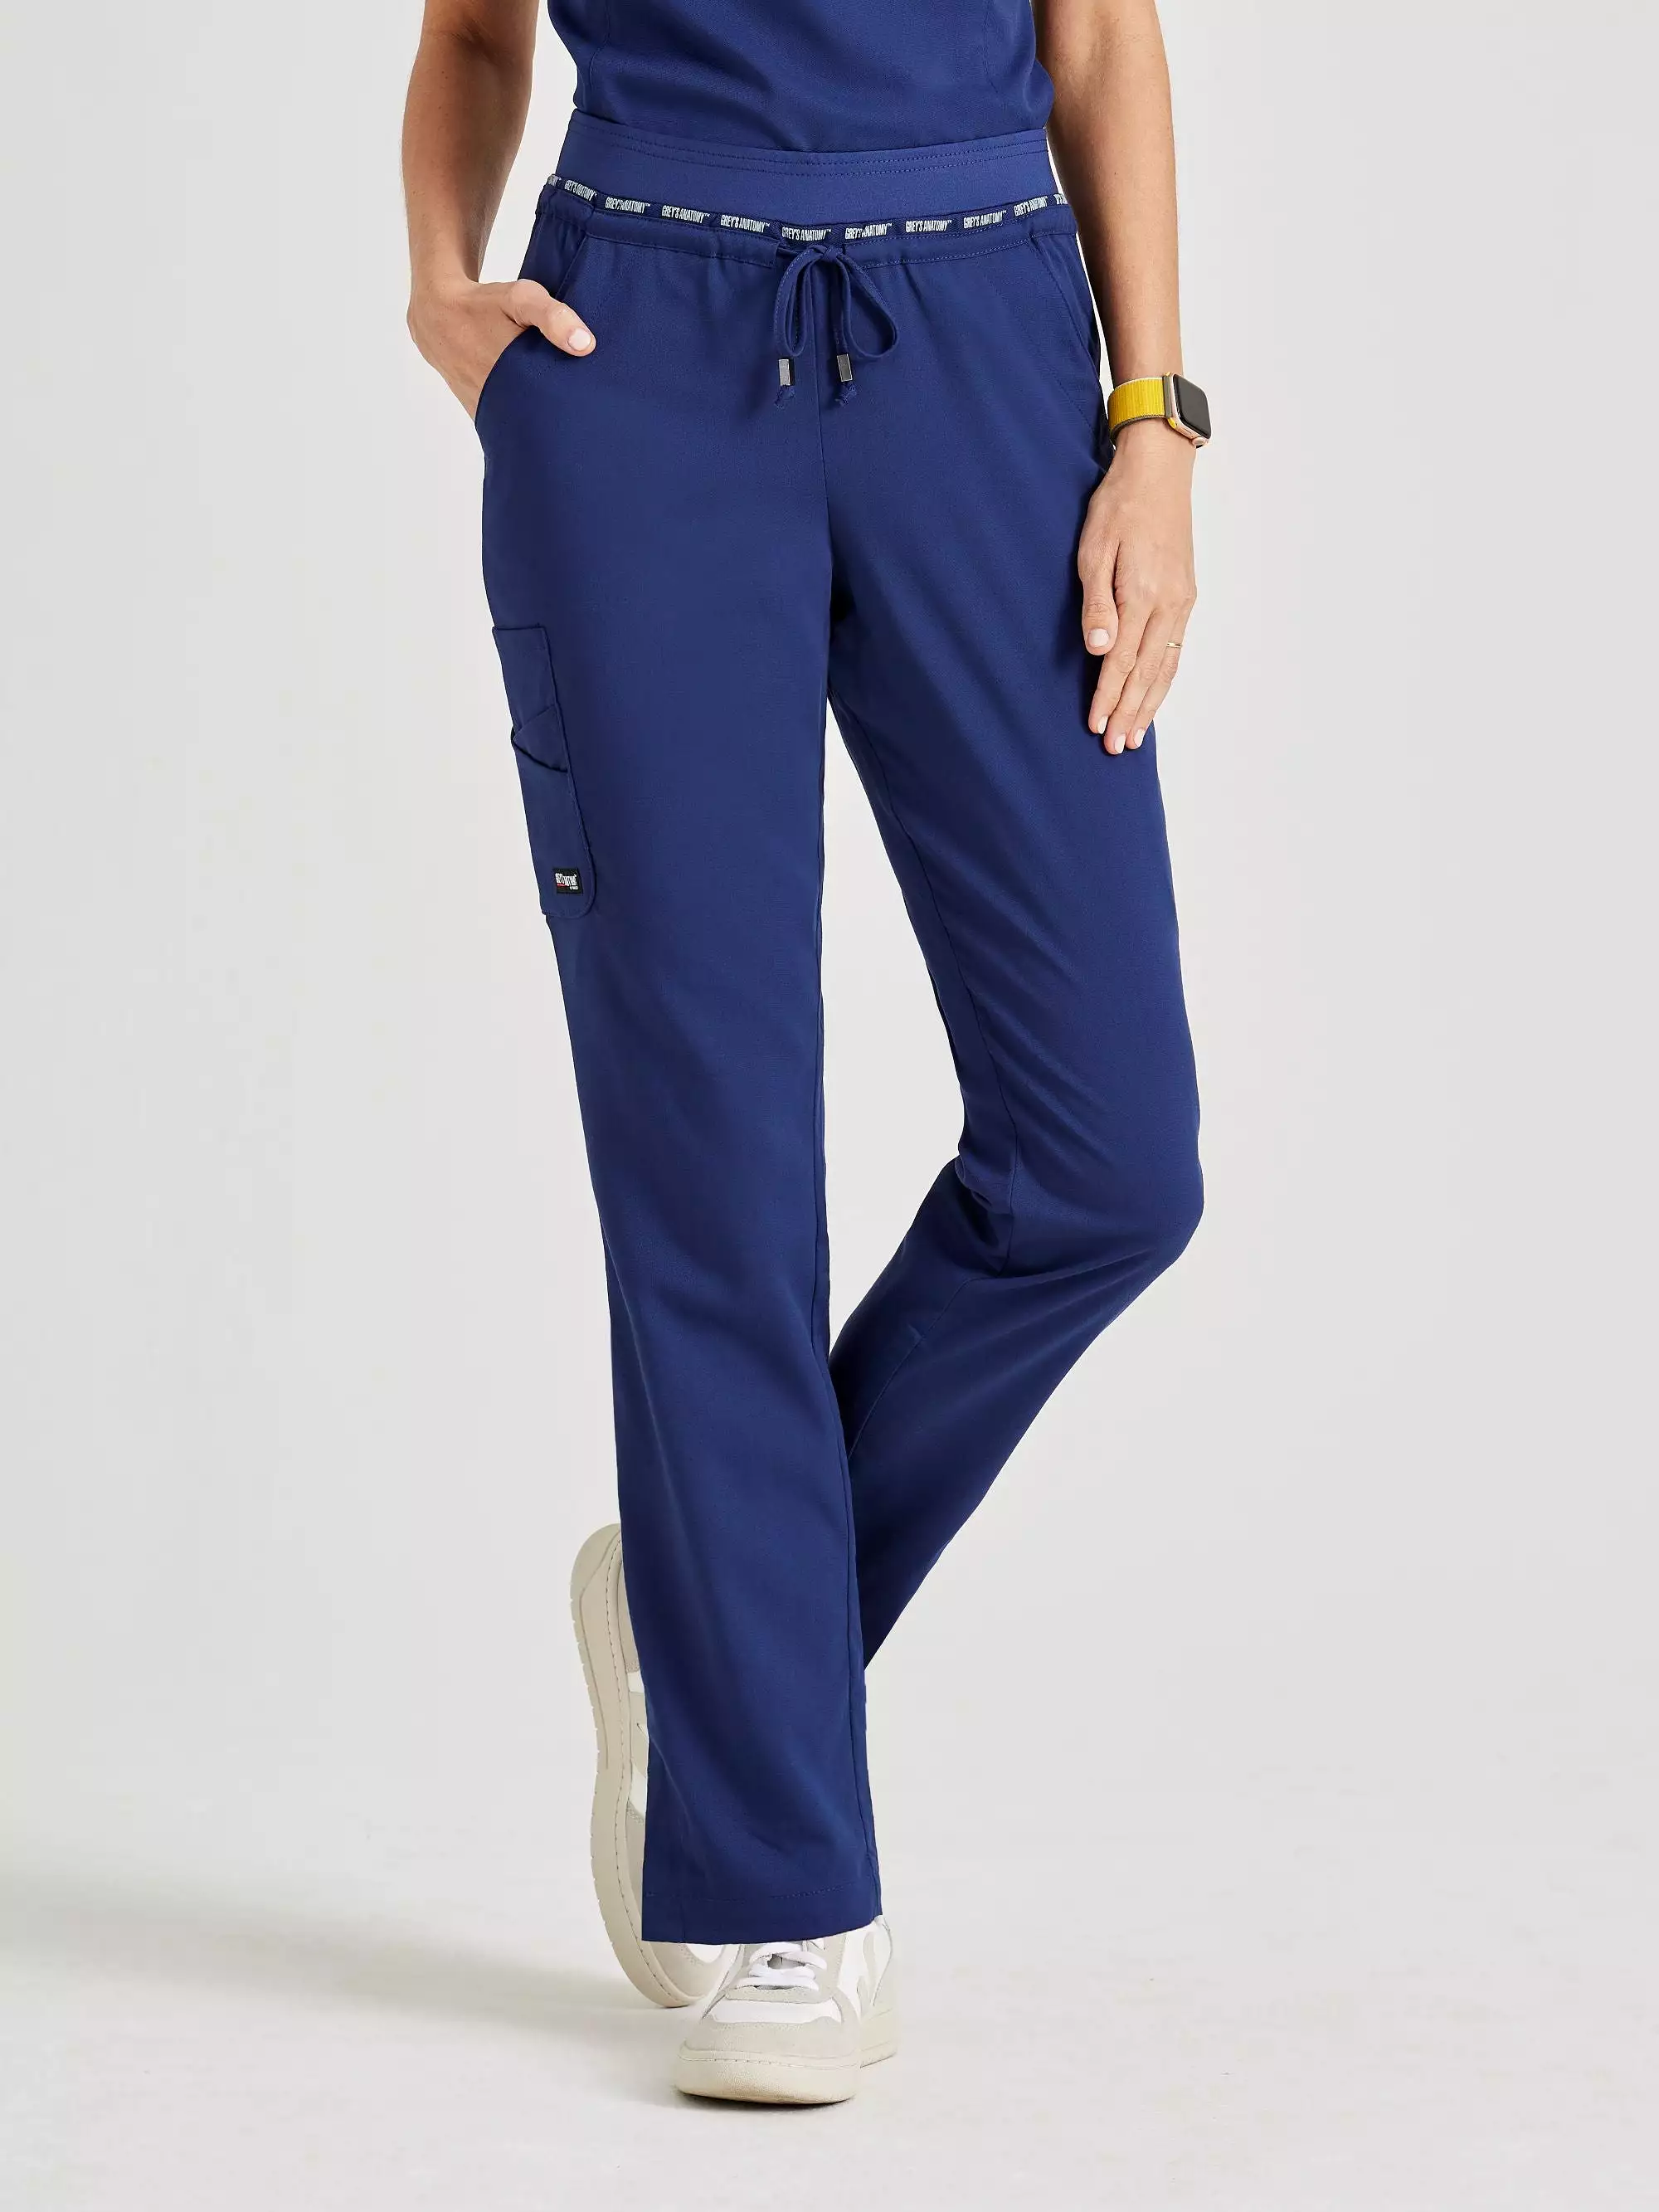 Barco Grey's Anatomy +SpandexStretch GRSP526 Serena Tapered Pant